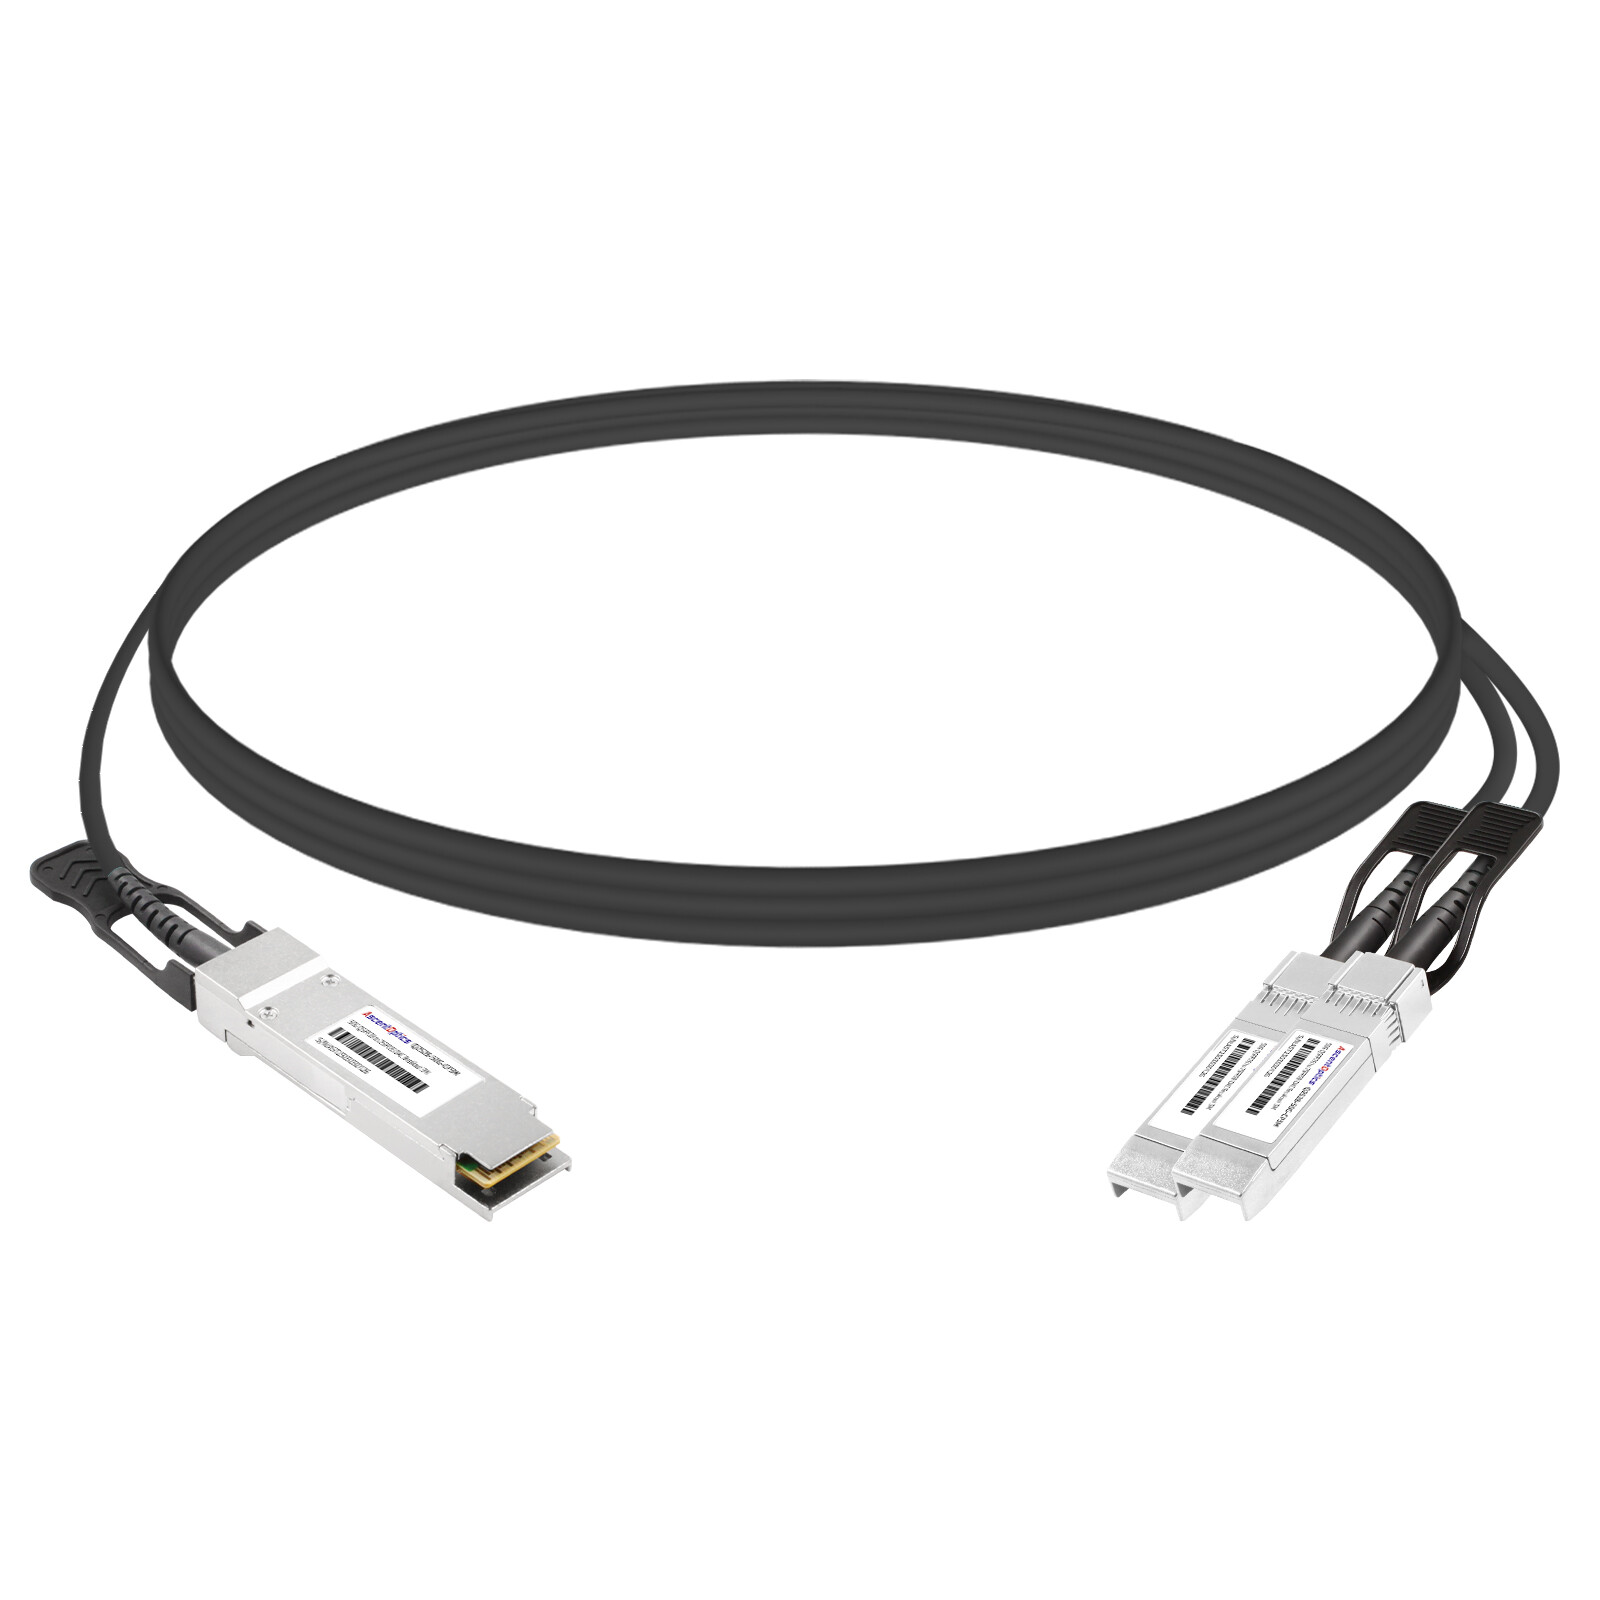 50G QSFP28 to 2x 25G SFP28 Copper Breakout Cable,3 Meters,Passive